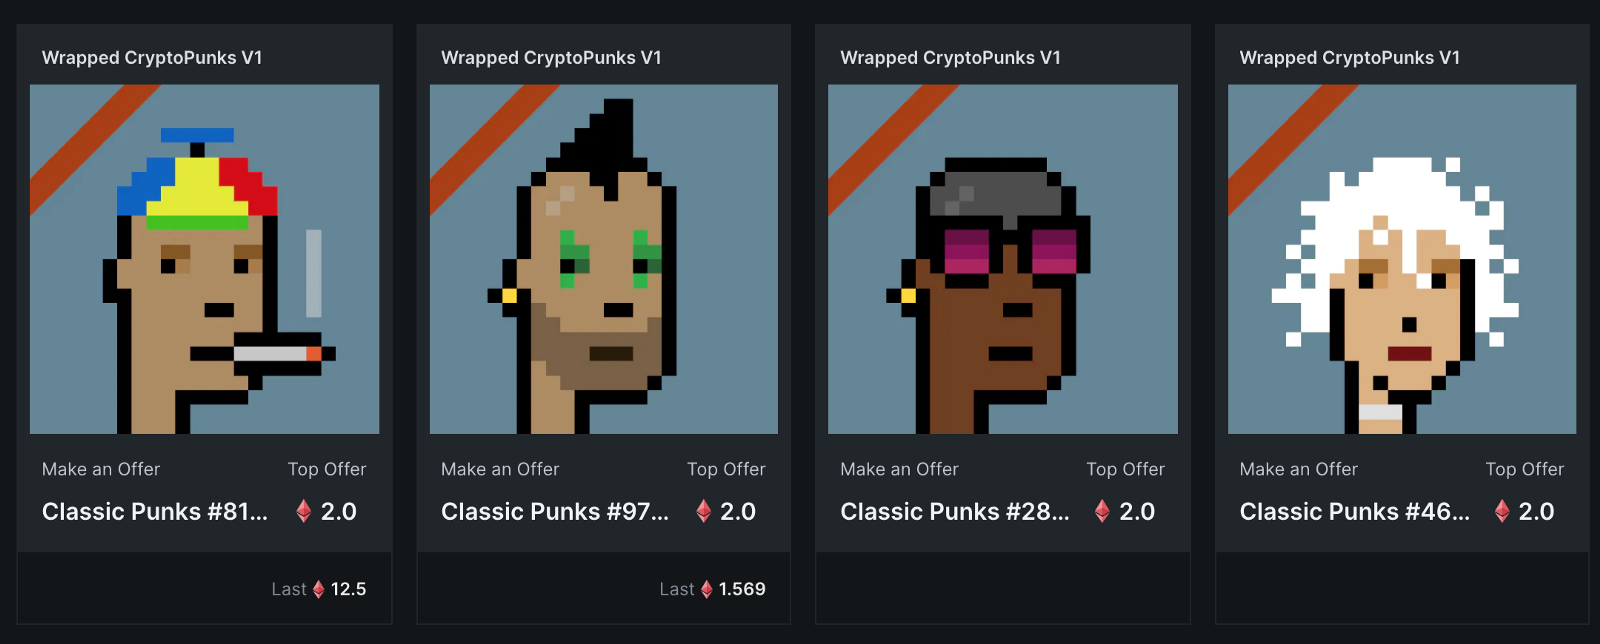 Breaking Down V1 CryptoPunks: The First CryptoPunks Release